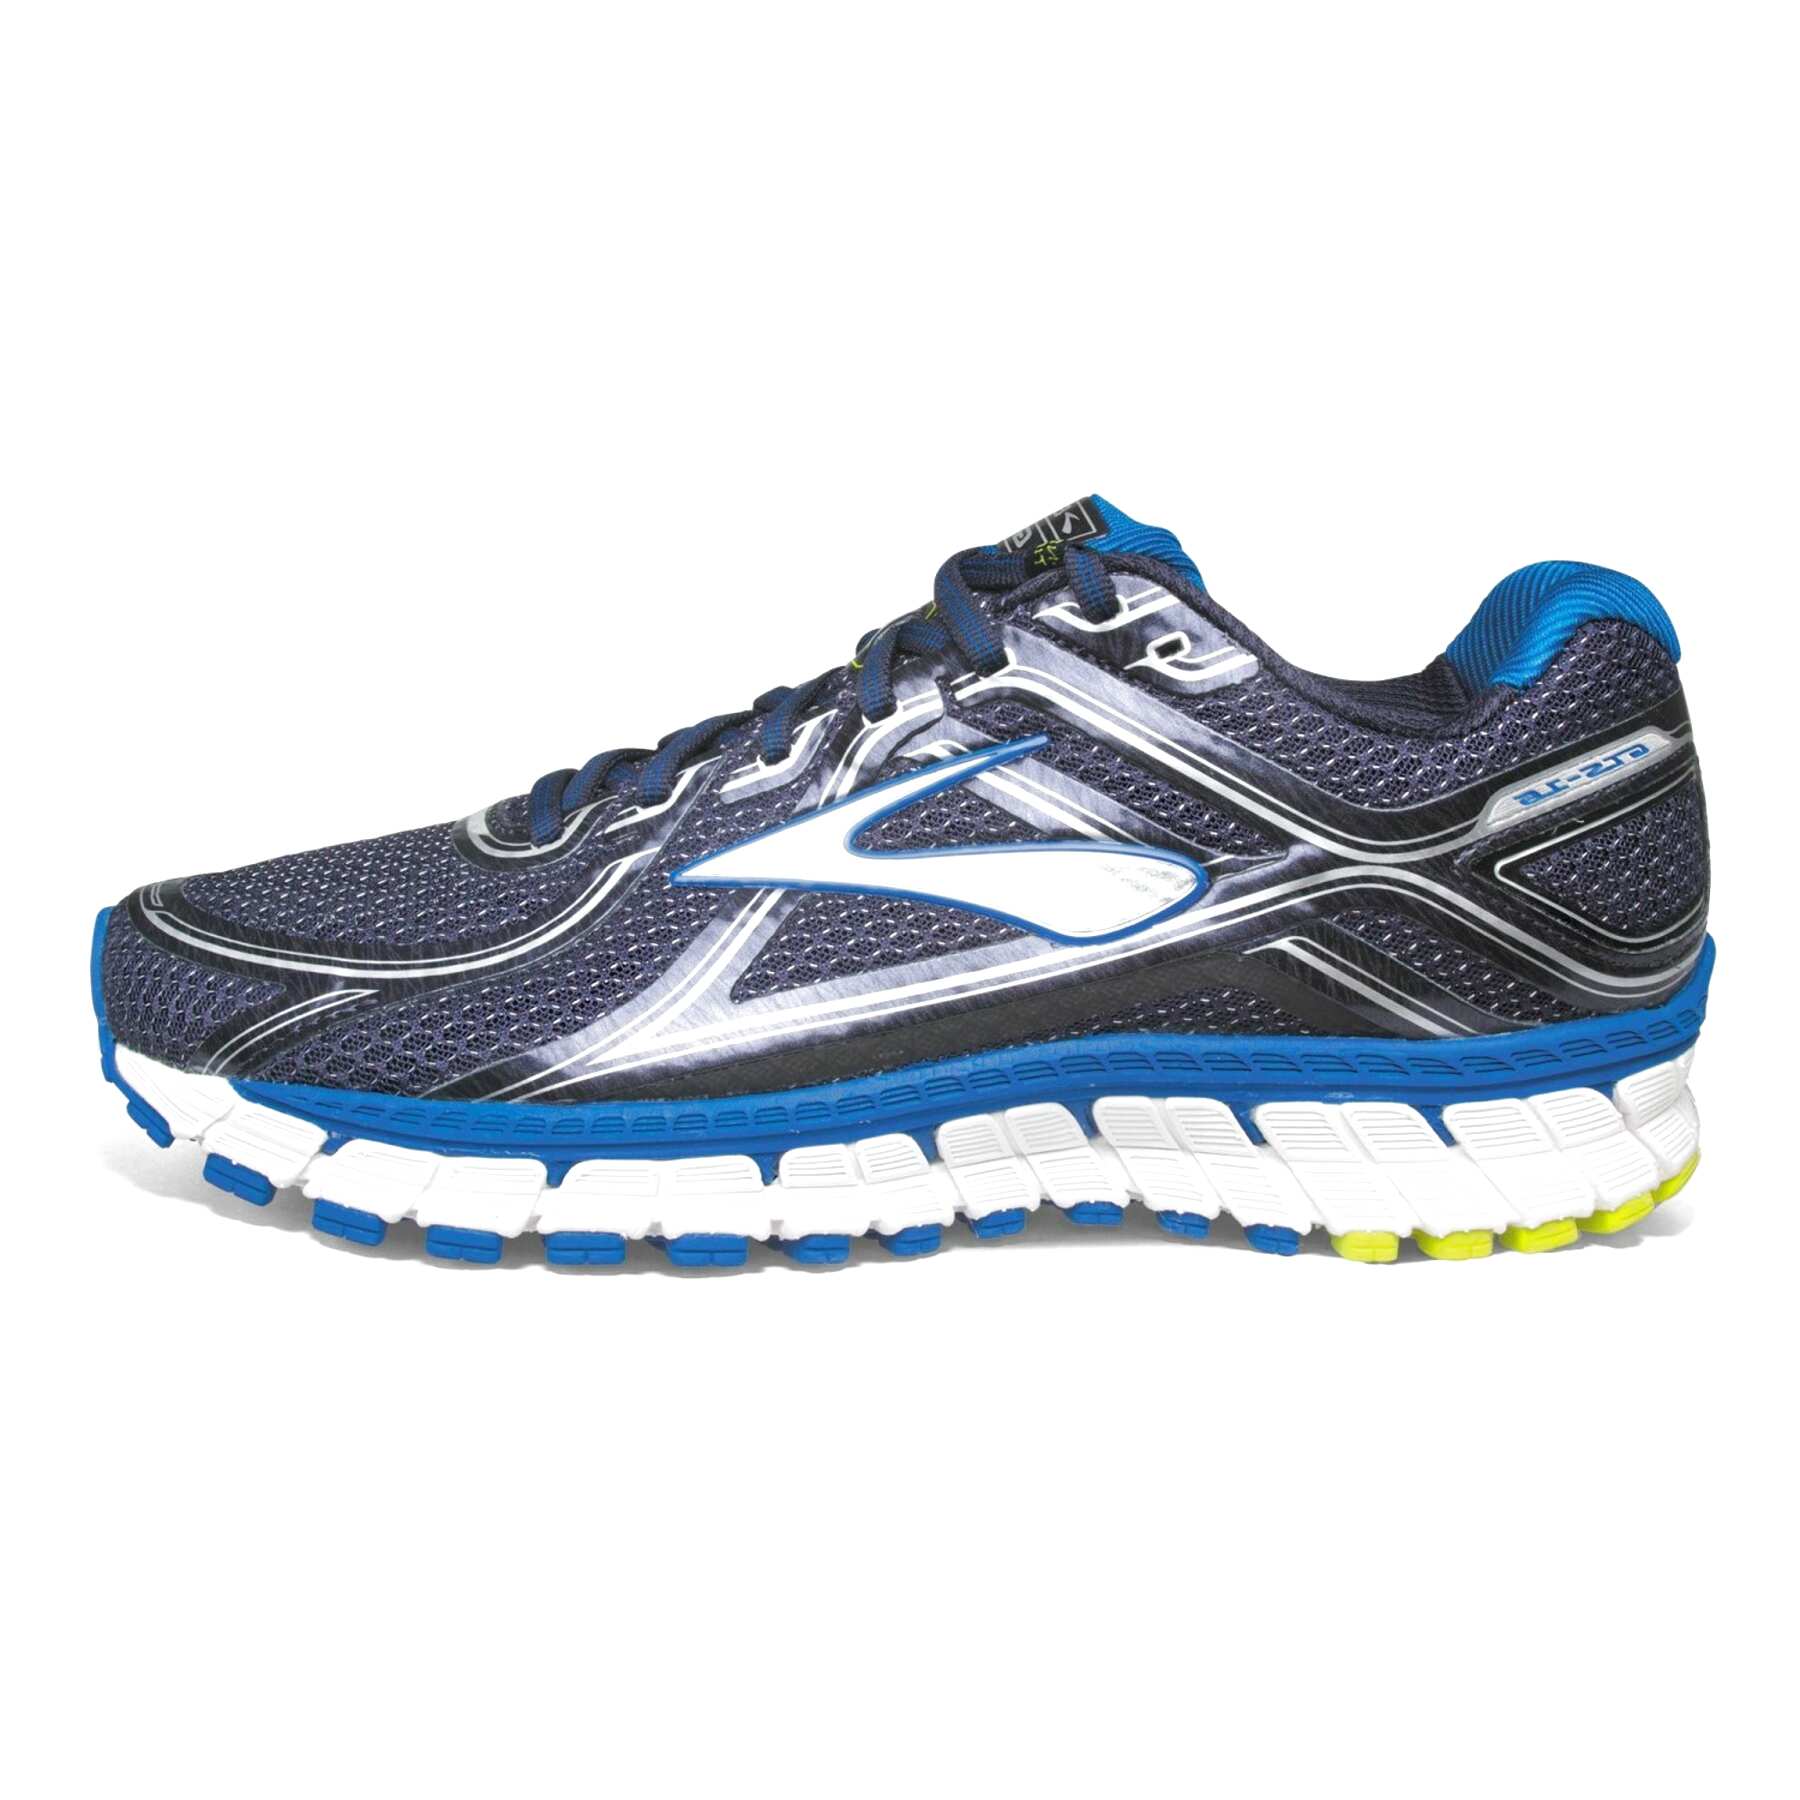 Brooks Adrenaline for sale in UK | 59 used Brooks Adrenalines